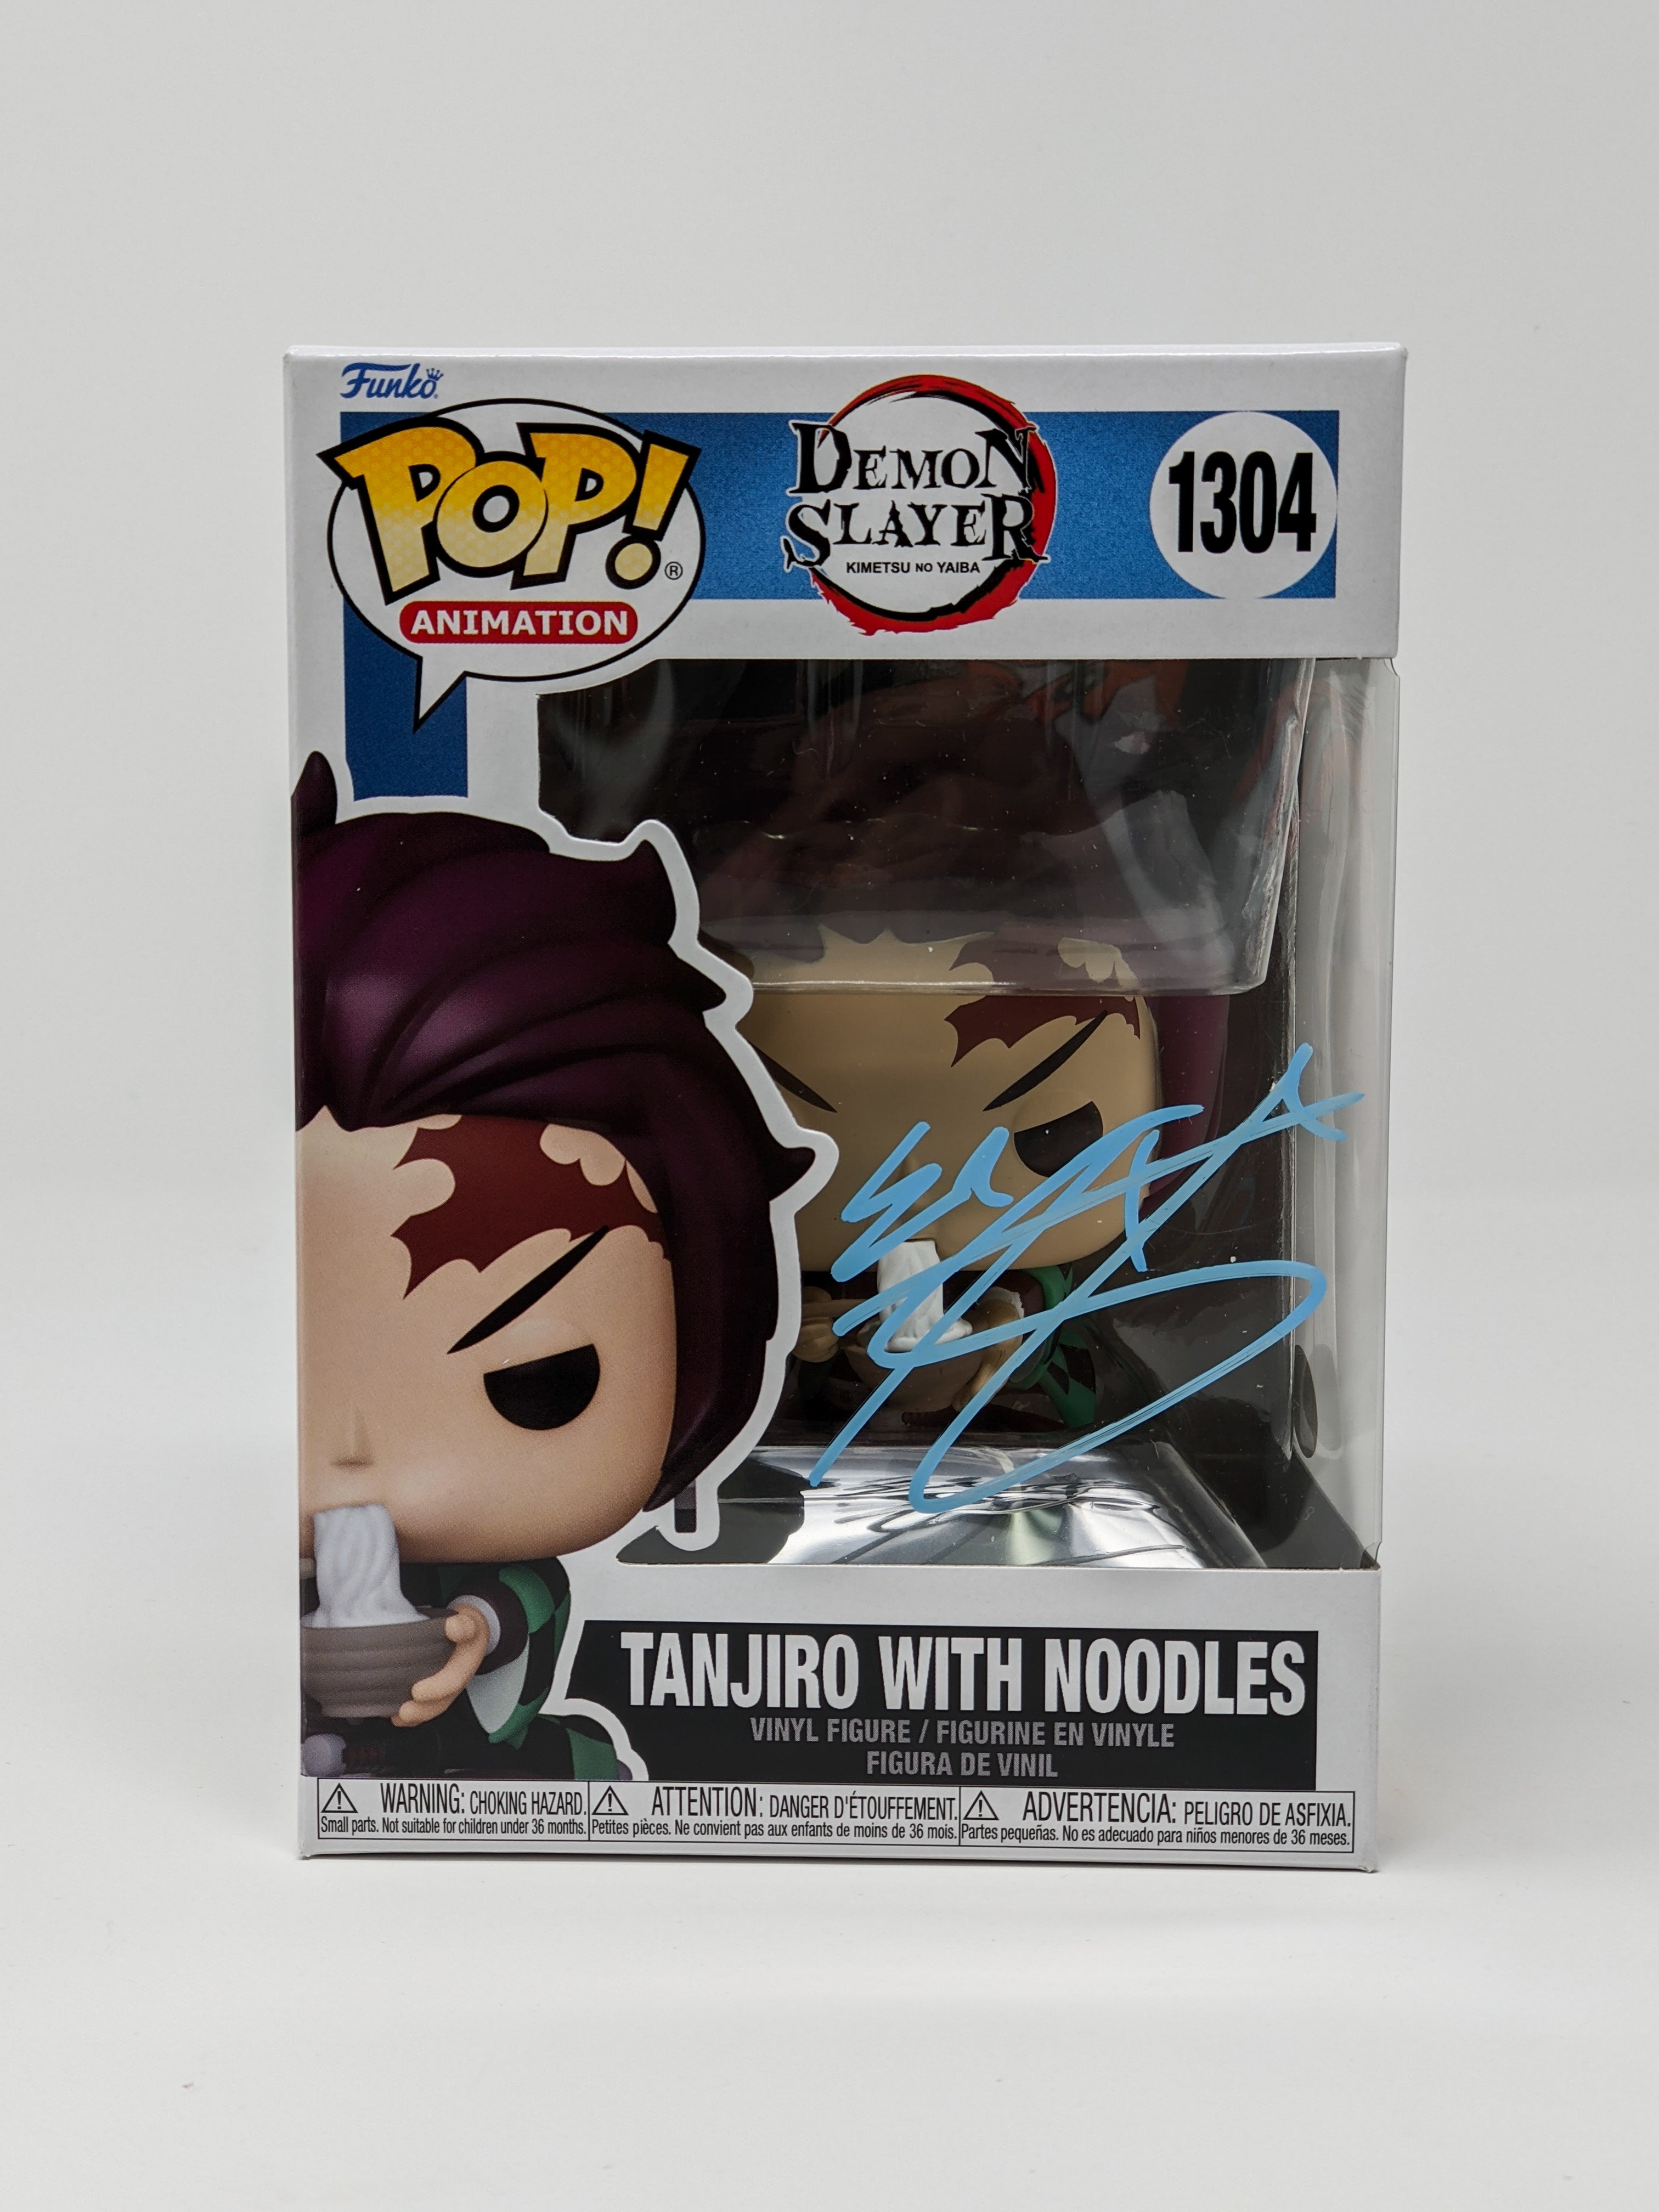 Zach Aguilar Demon Slayer Tanjiro With Noodles #867 Signed Funko Pop JSA Certified Autograph GalaxyCon